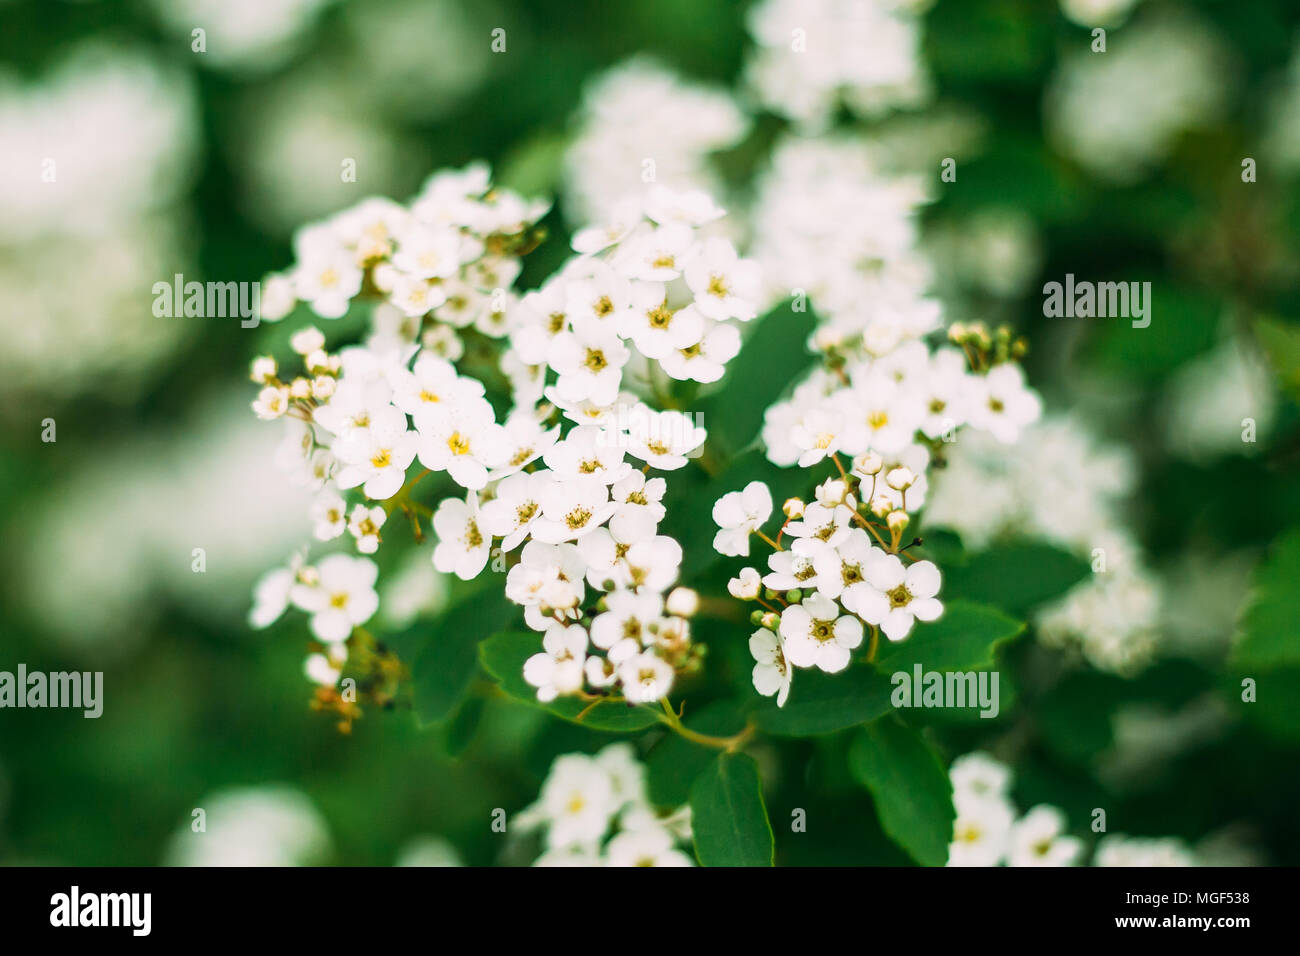 White Spirea Flowers On Bush At Spring. Spiraea Flowers Are Highly Valued In Decorative Gardening And Forestry Management. The Plant Is Widely Used In Stock Photo